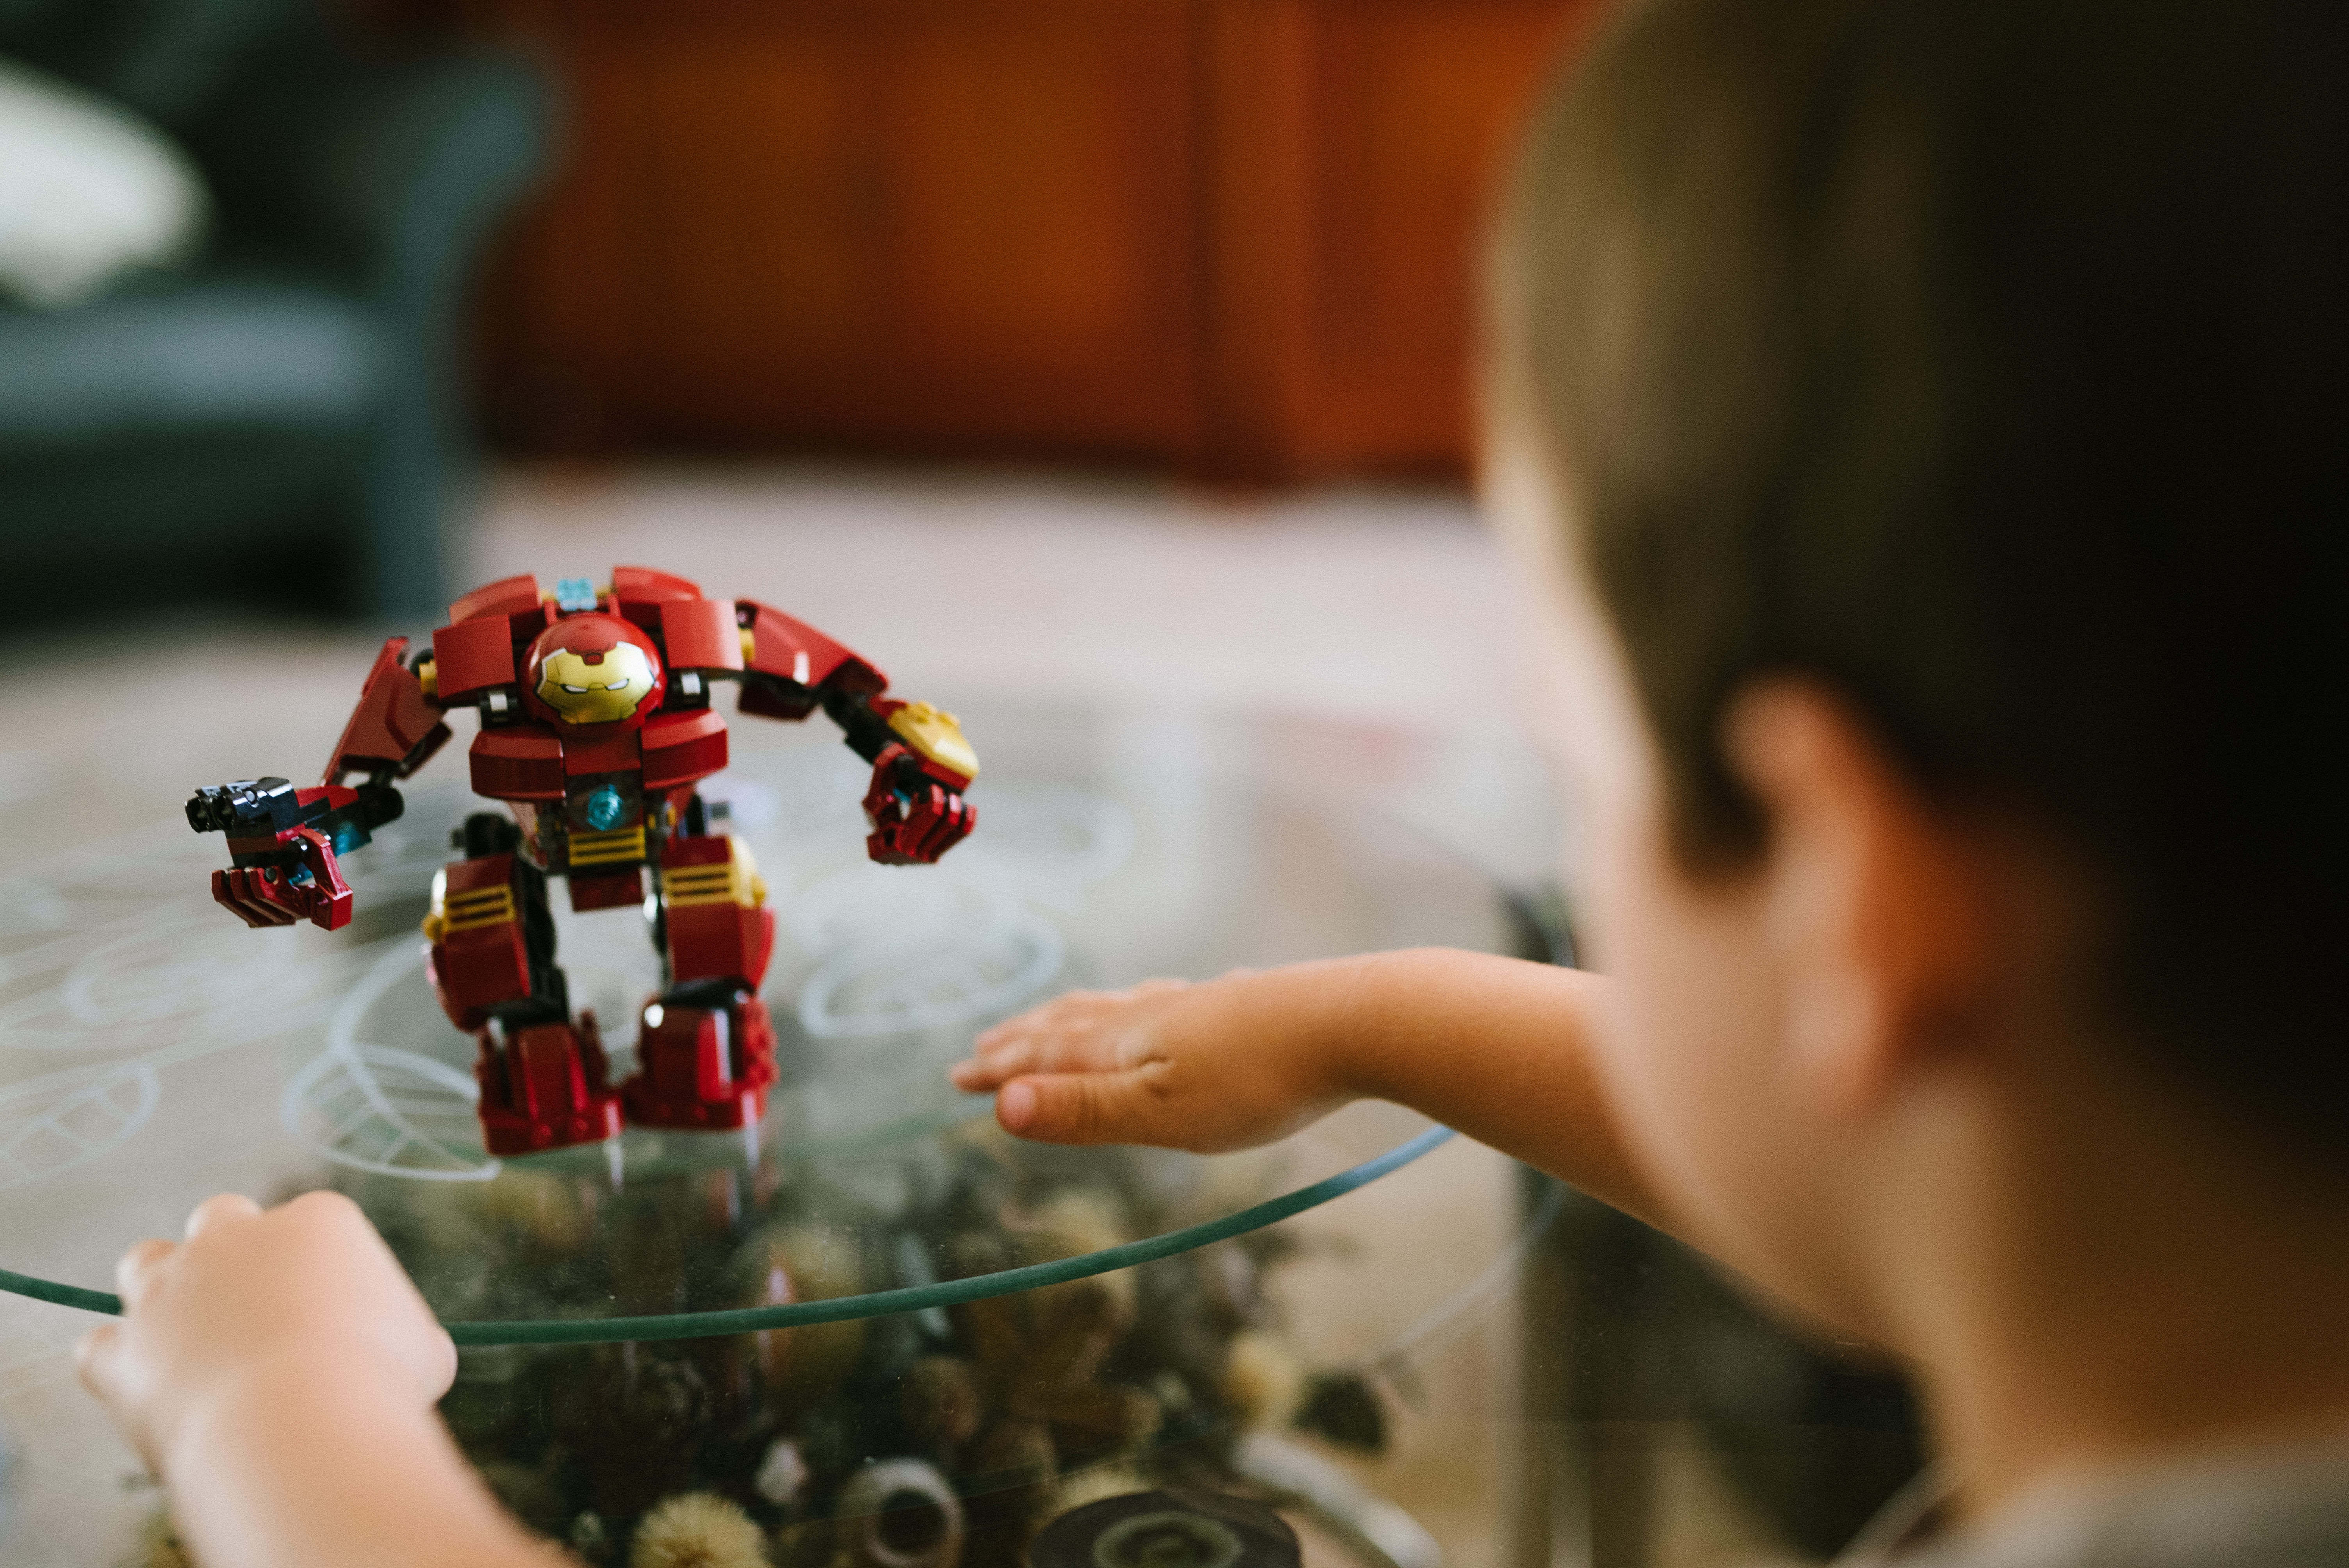 boy facing red and yellow ironman toy